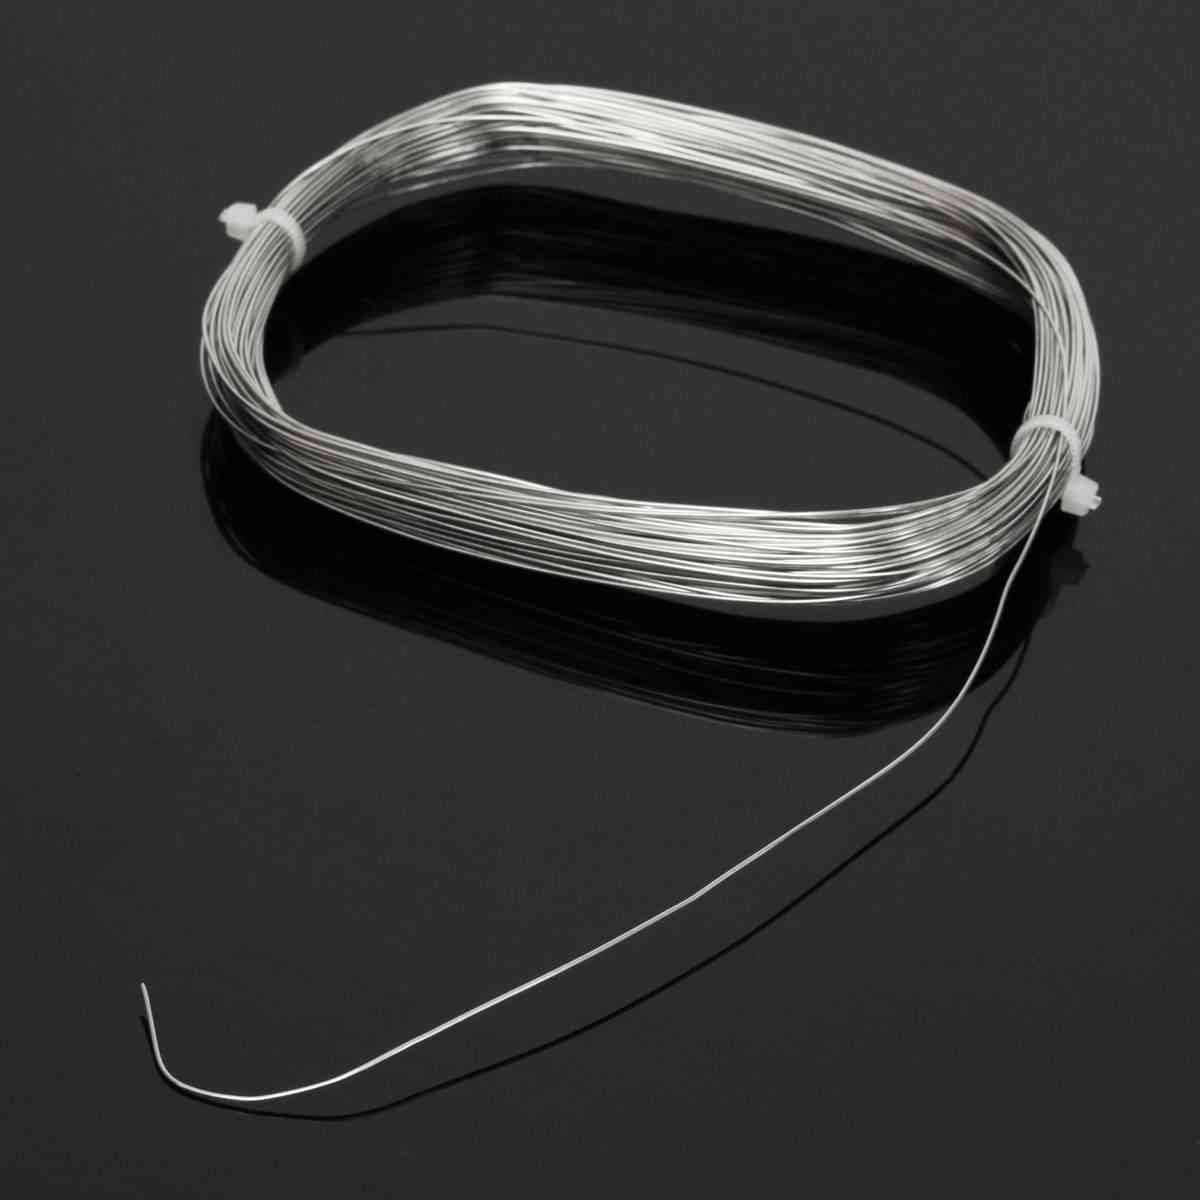 304 Stainless Steel Wire Rope Tensile Soft Structure Fishing, Lifting Cable Clothesline